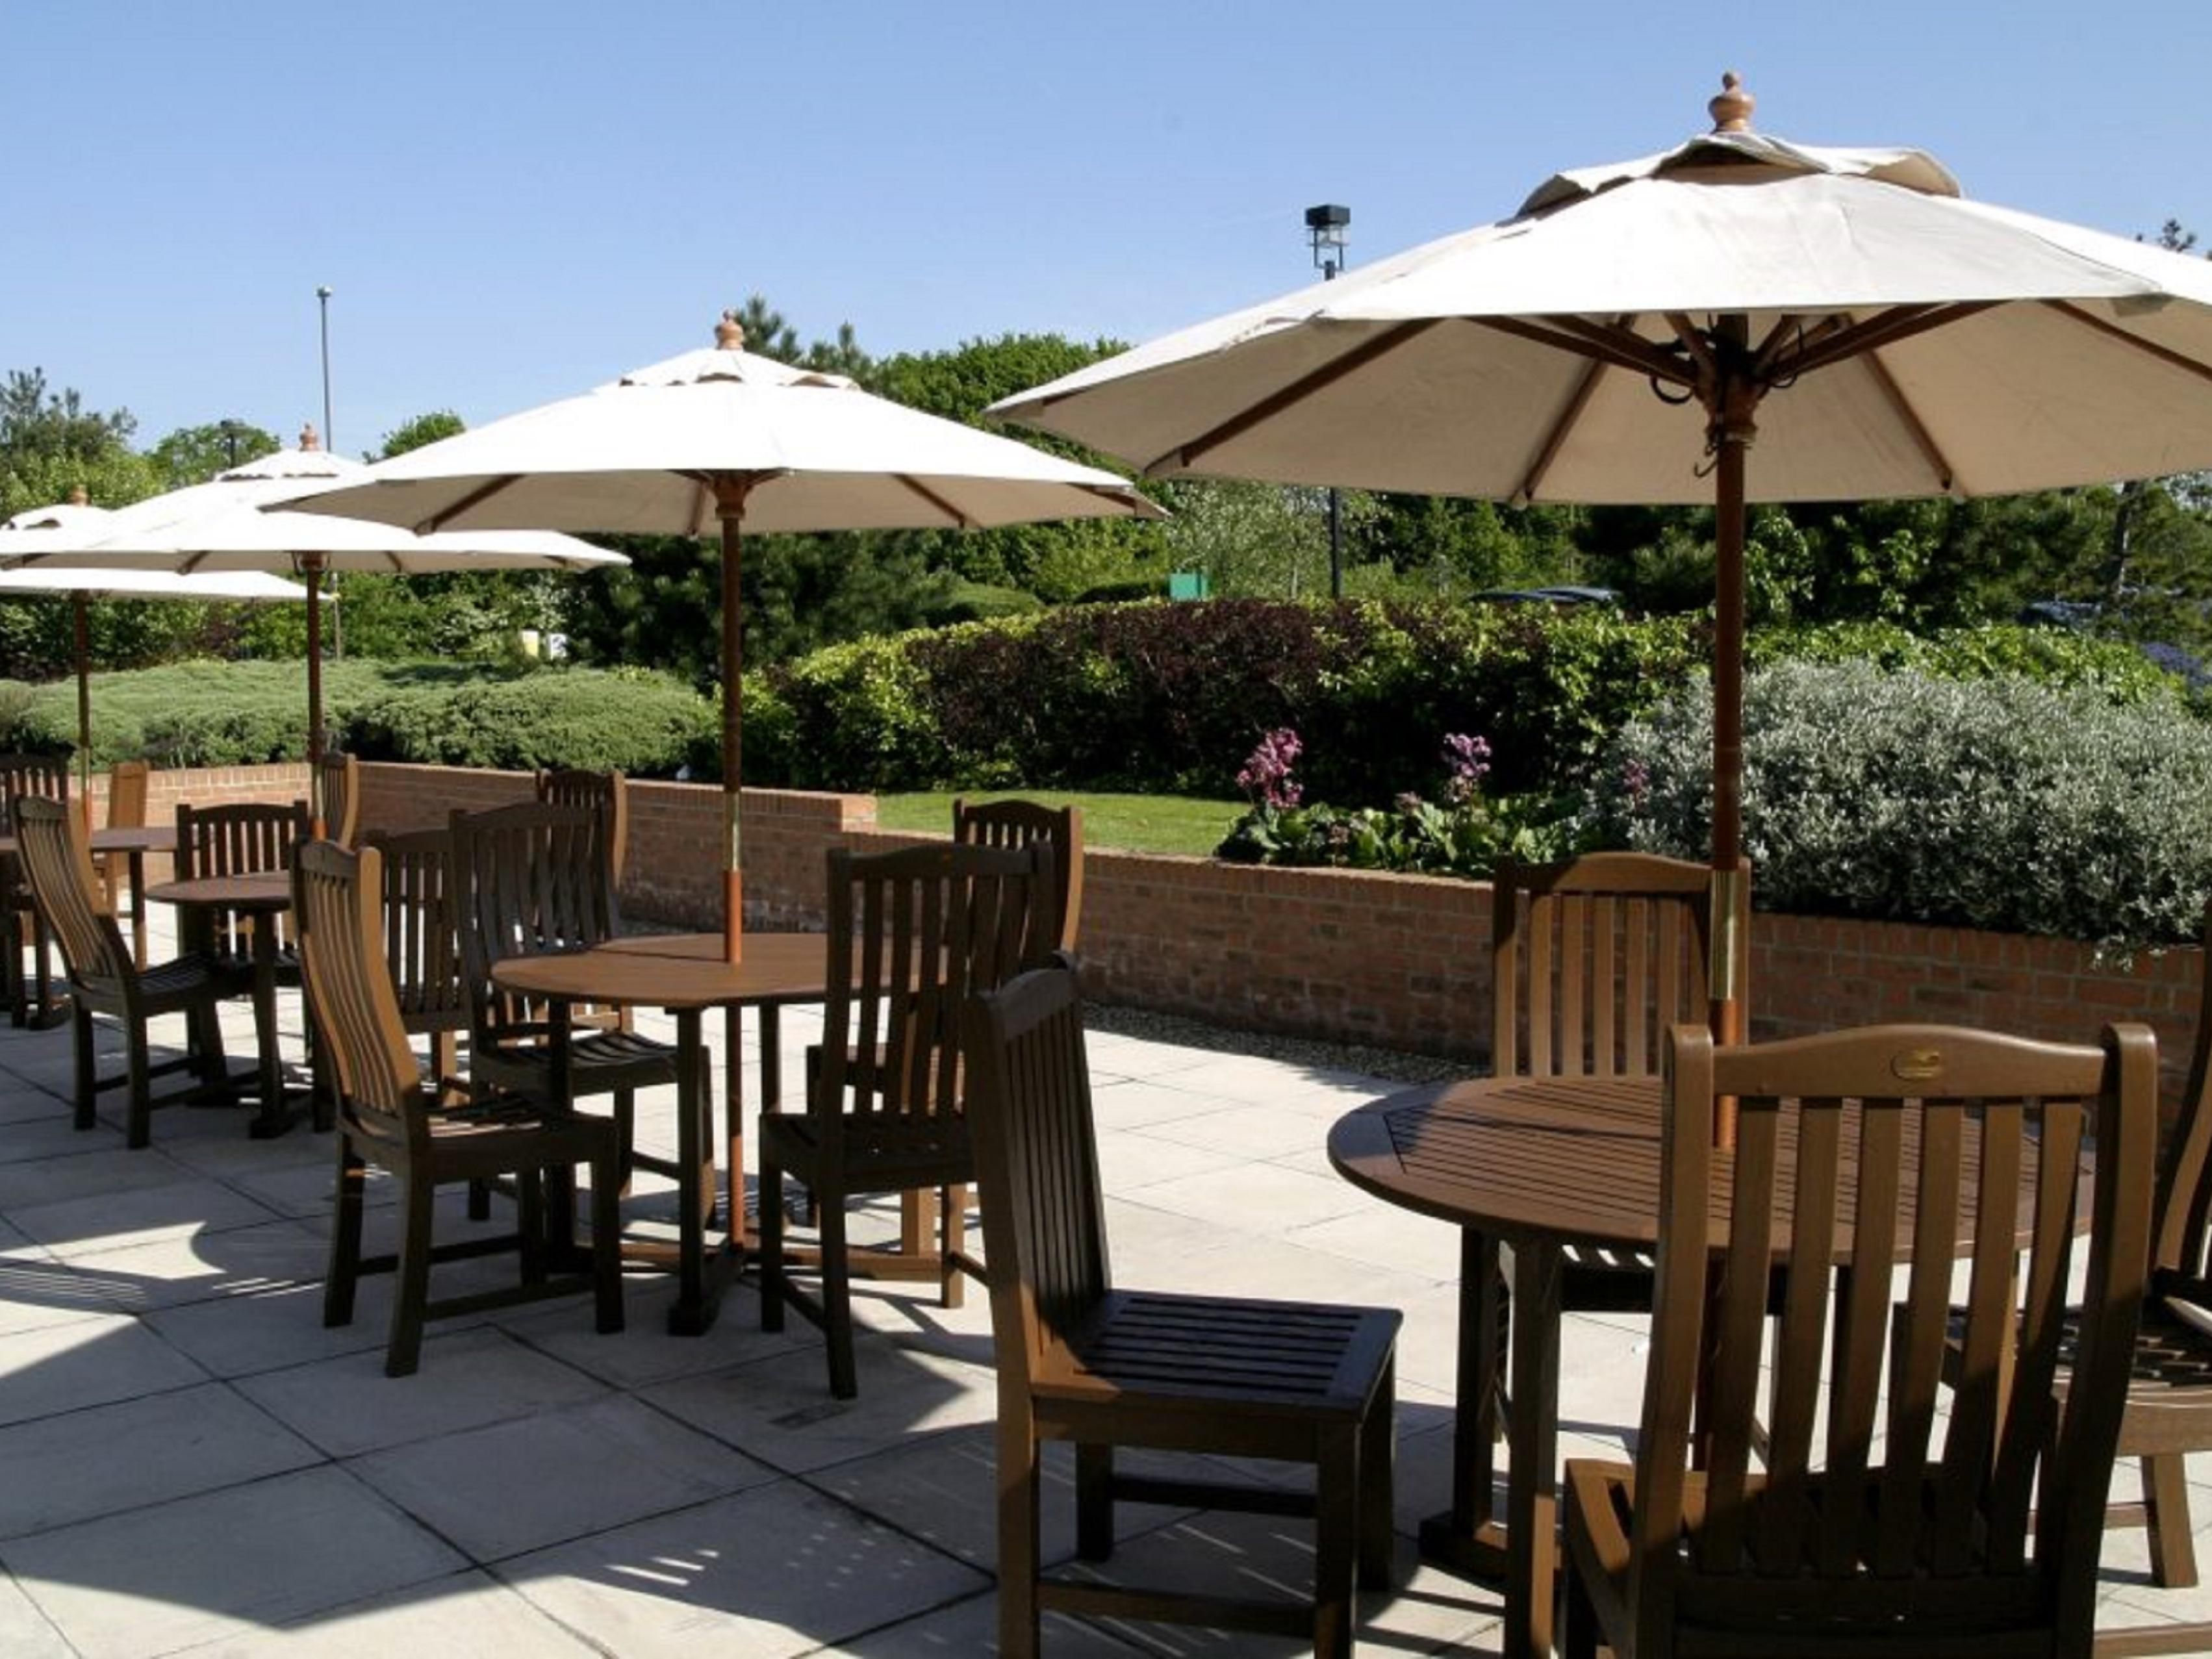 Enjoy a cold refreshment in our outdoor seating area, perfect for the warmer months.